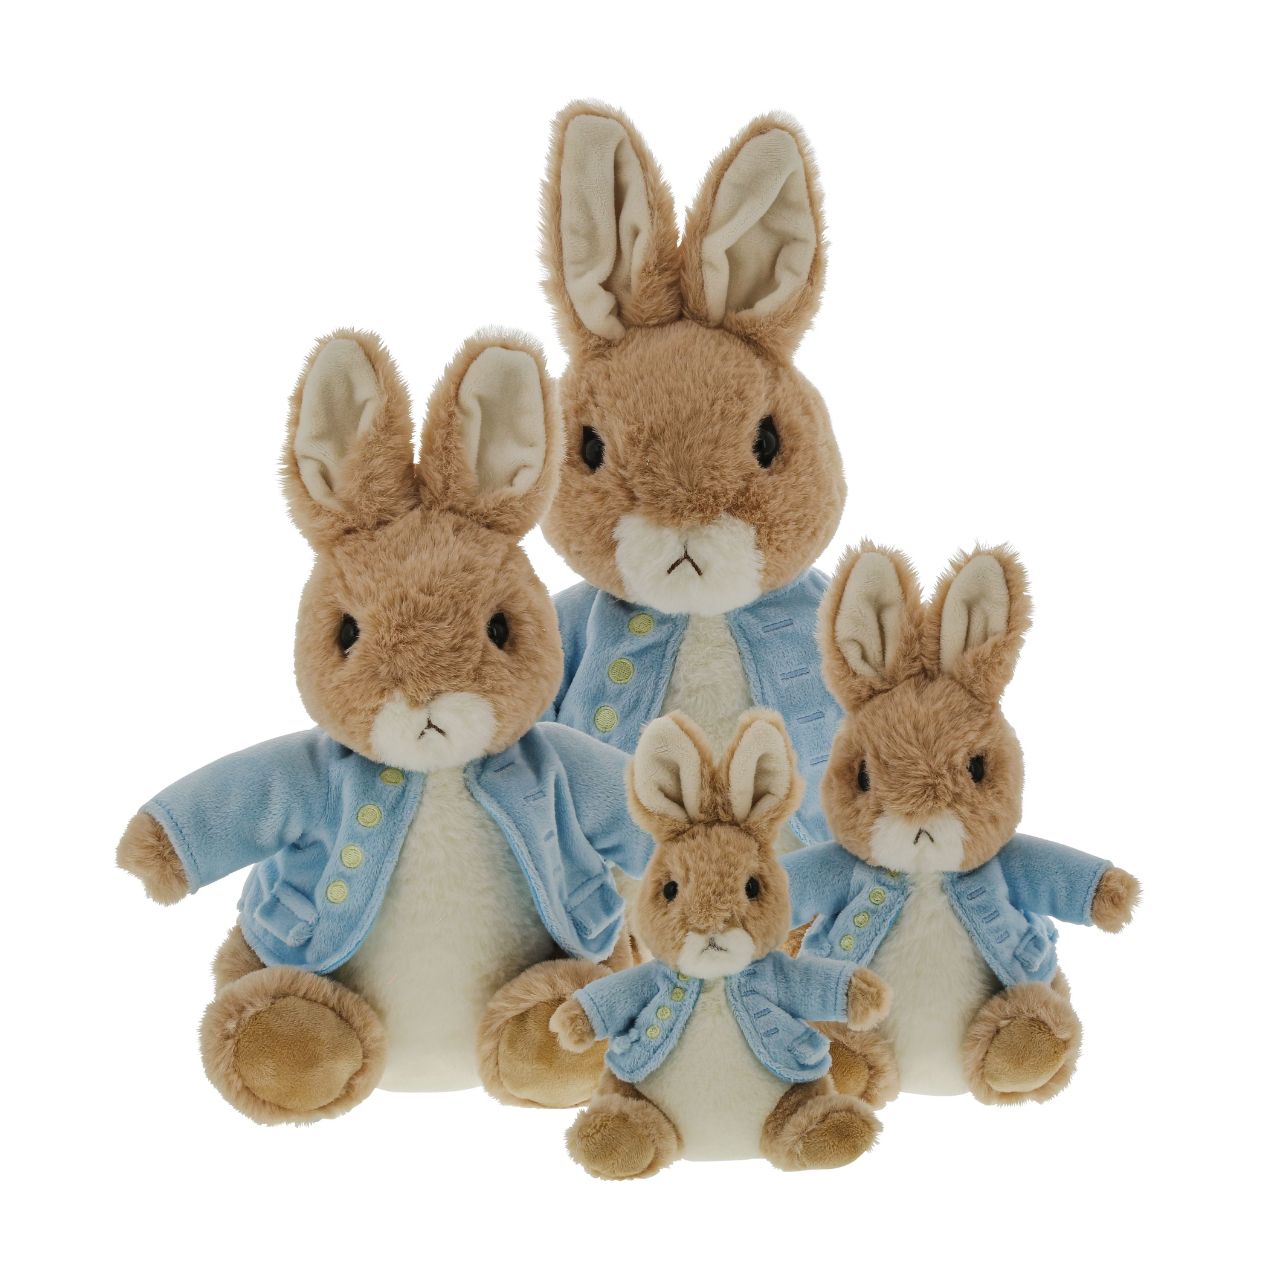 Peter Rabbit Medium  This Peter Rabbit soft toy is made from beautifully soft fabric and is dressed in clothing exactly as illustrated by Beatrix Potter, with his signature blue jacket. The Peter Rabbit collection features the much loved characters from the Beatrix Potter books and this quality and authentic soft toy is sure to be adored for many years to come.